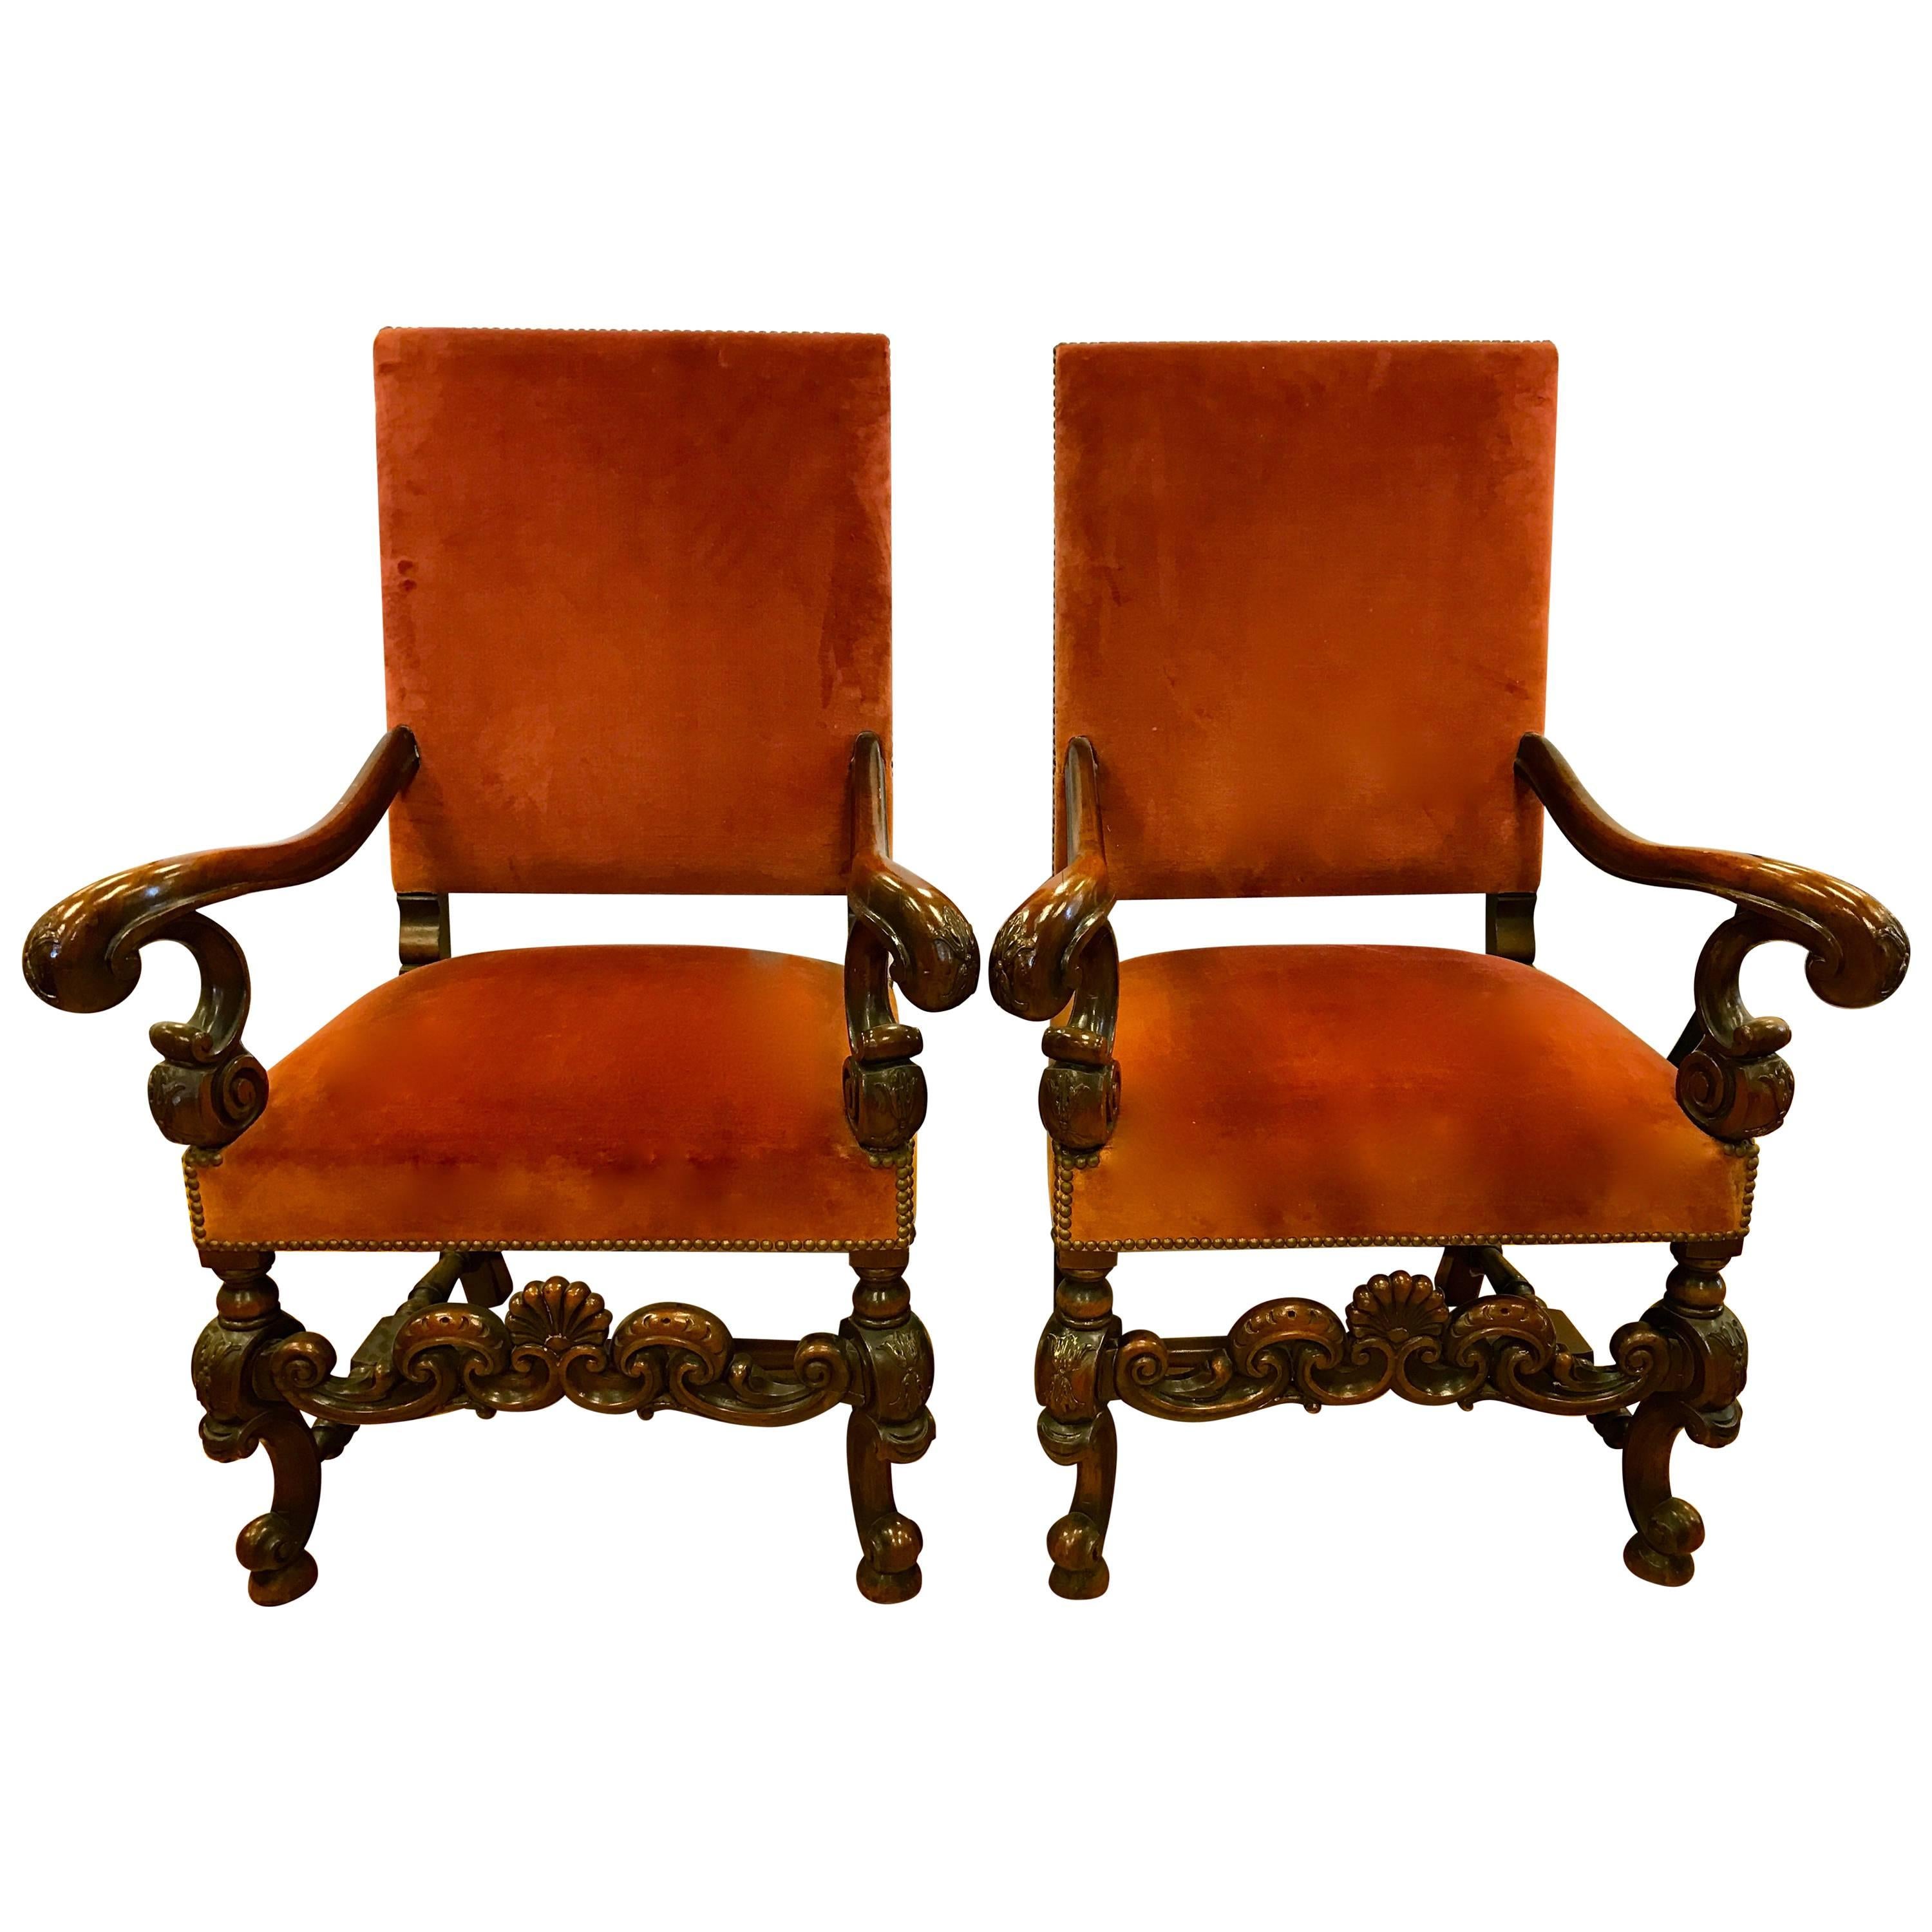 Pair of Antique Italian Carved Walnut Armchairs